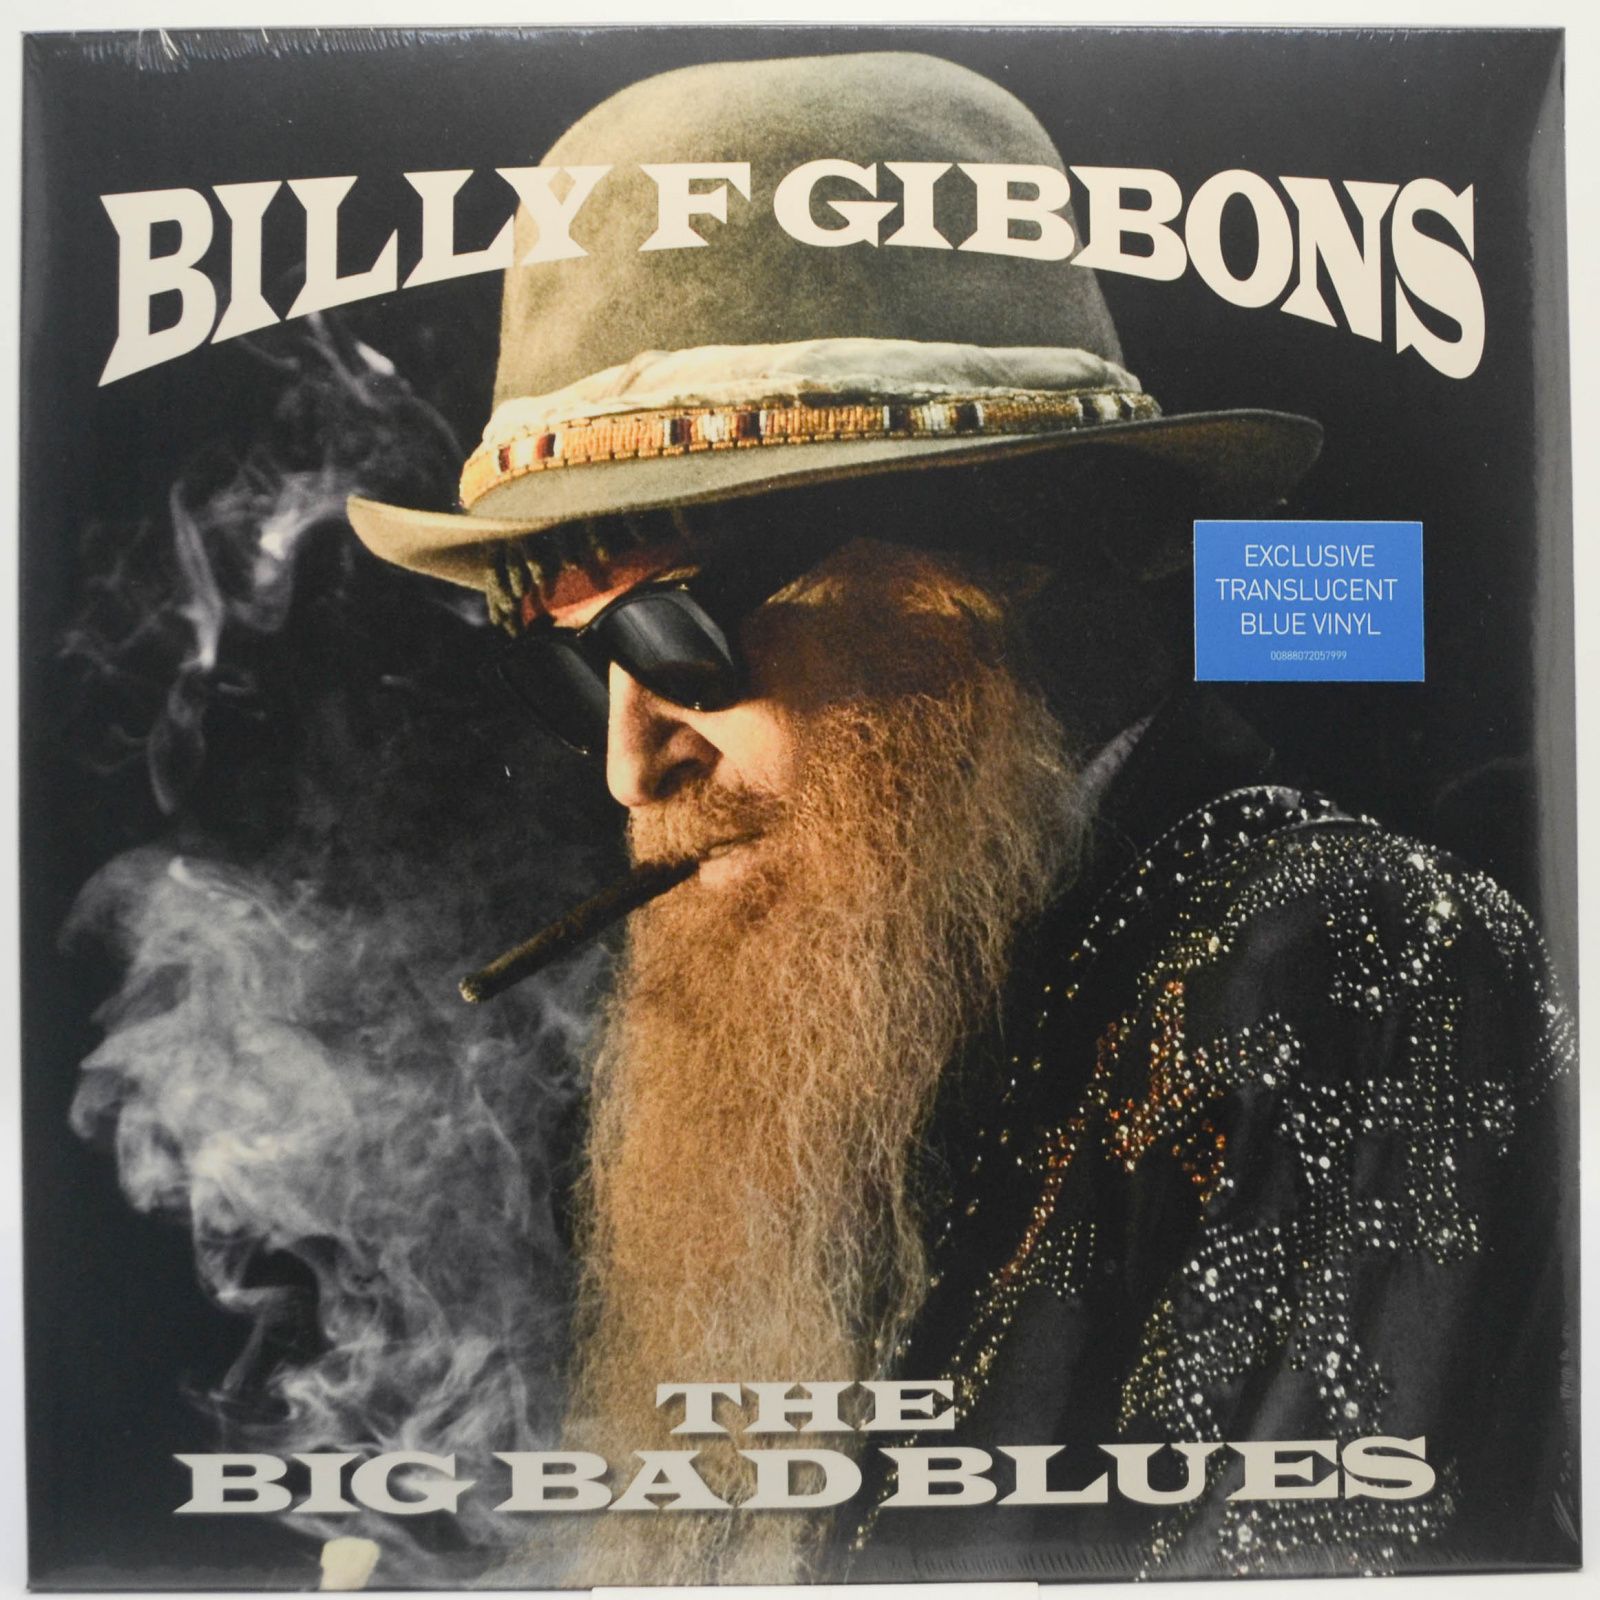 Billy F Gibbons — The Big Bad Blues, 2018